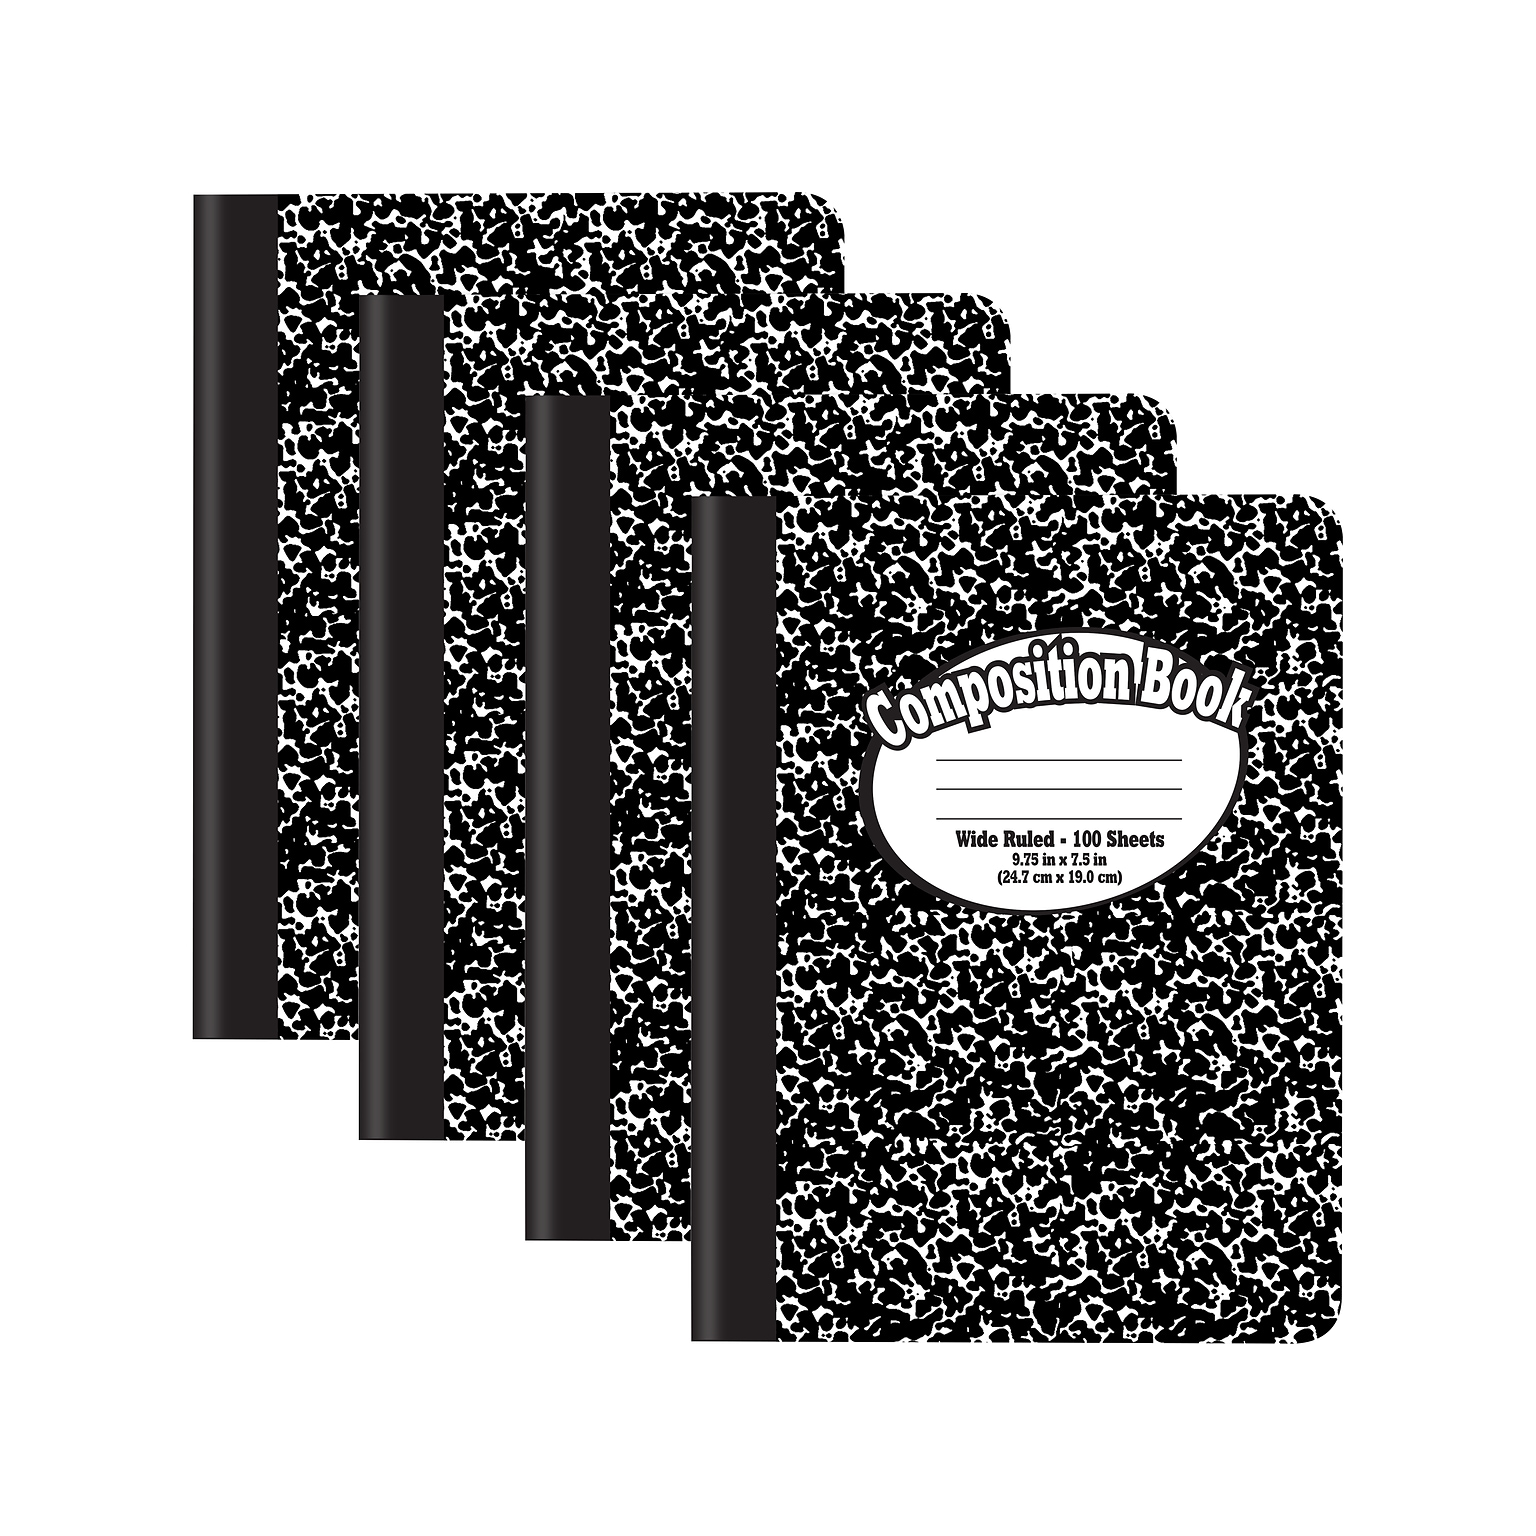 Better Office 1-Subject Composition Notebooks, 7.5 x 9.75, Wide Ruled, 100 Sheets, Black, 12/Pack (25112-12PK)